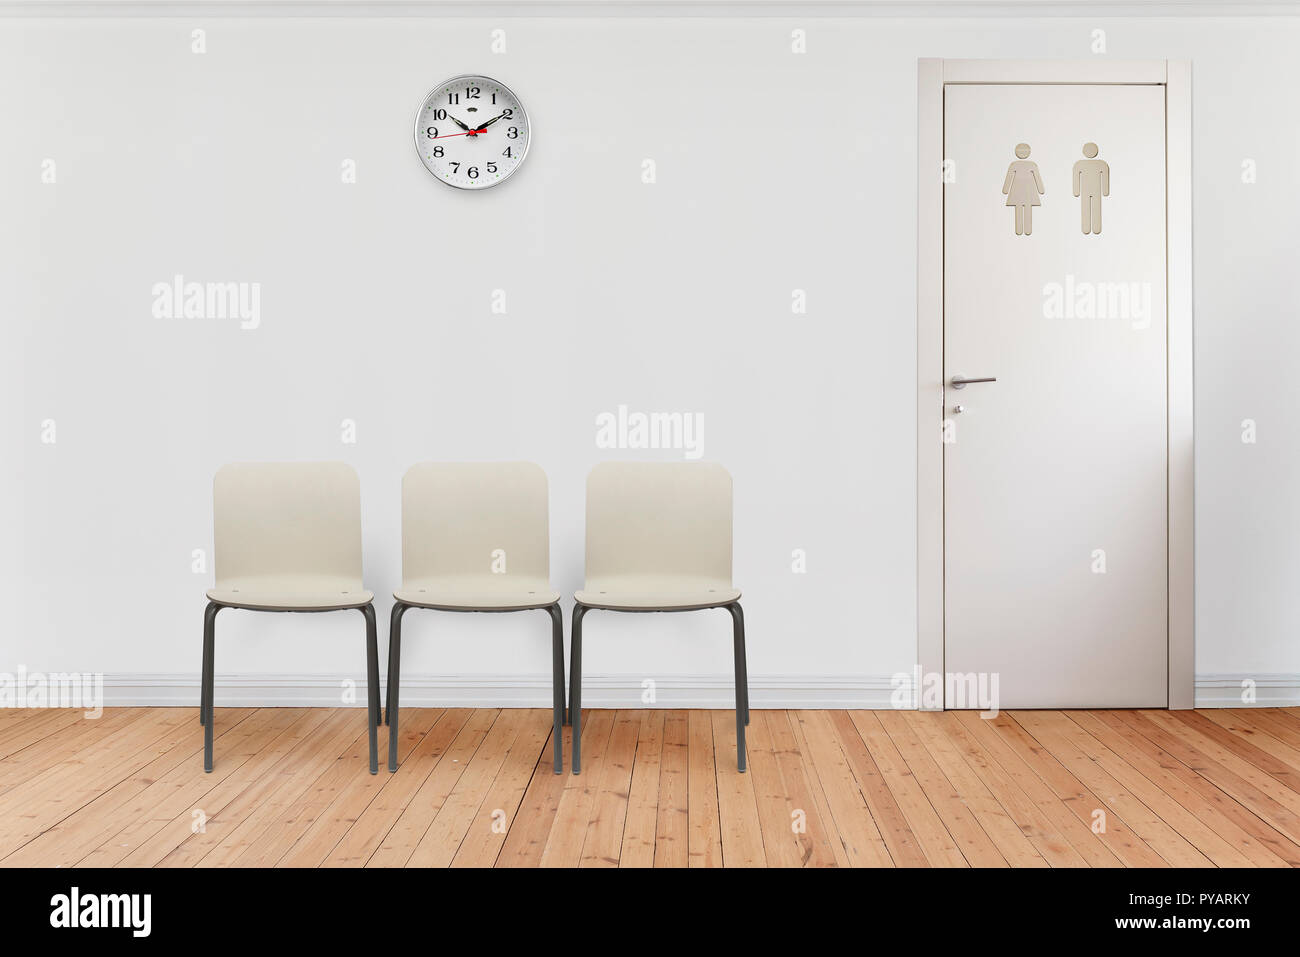 empty waiting room with chairs, clock on wall and bathroom door. Stock Photo